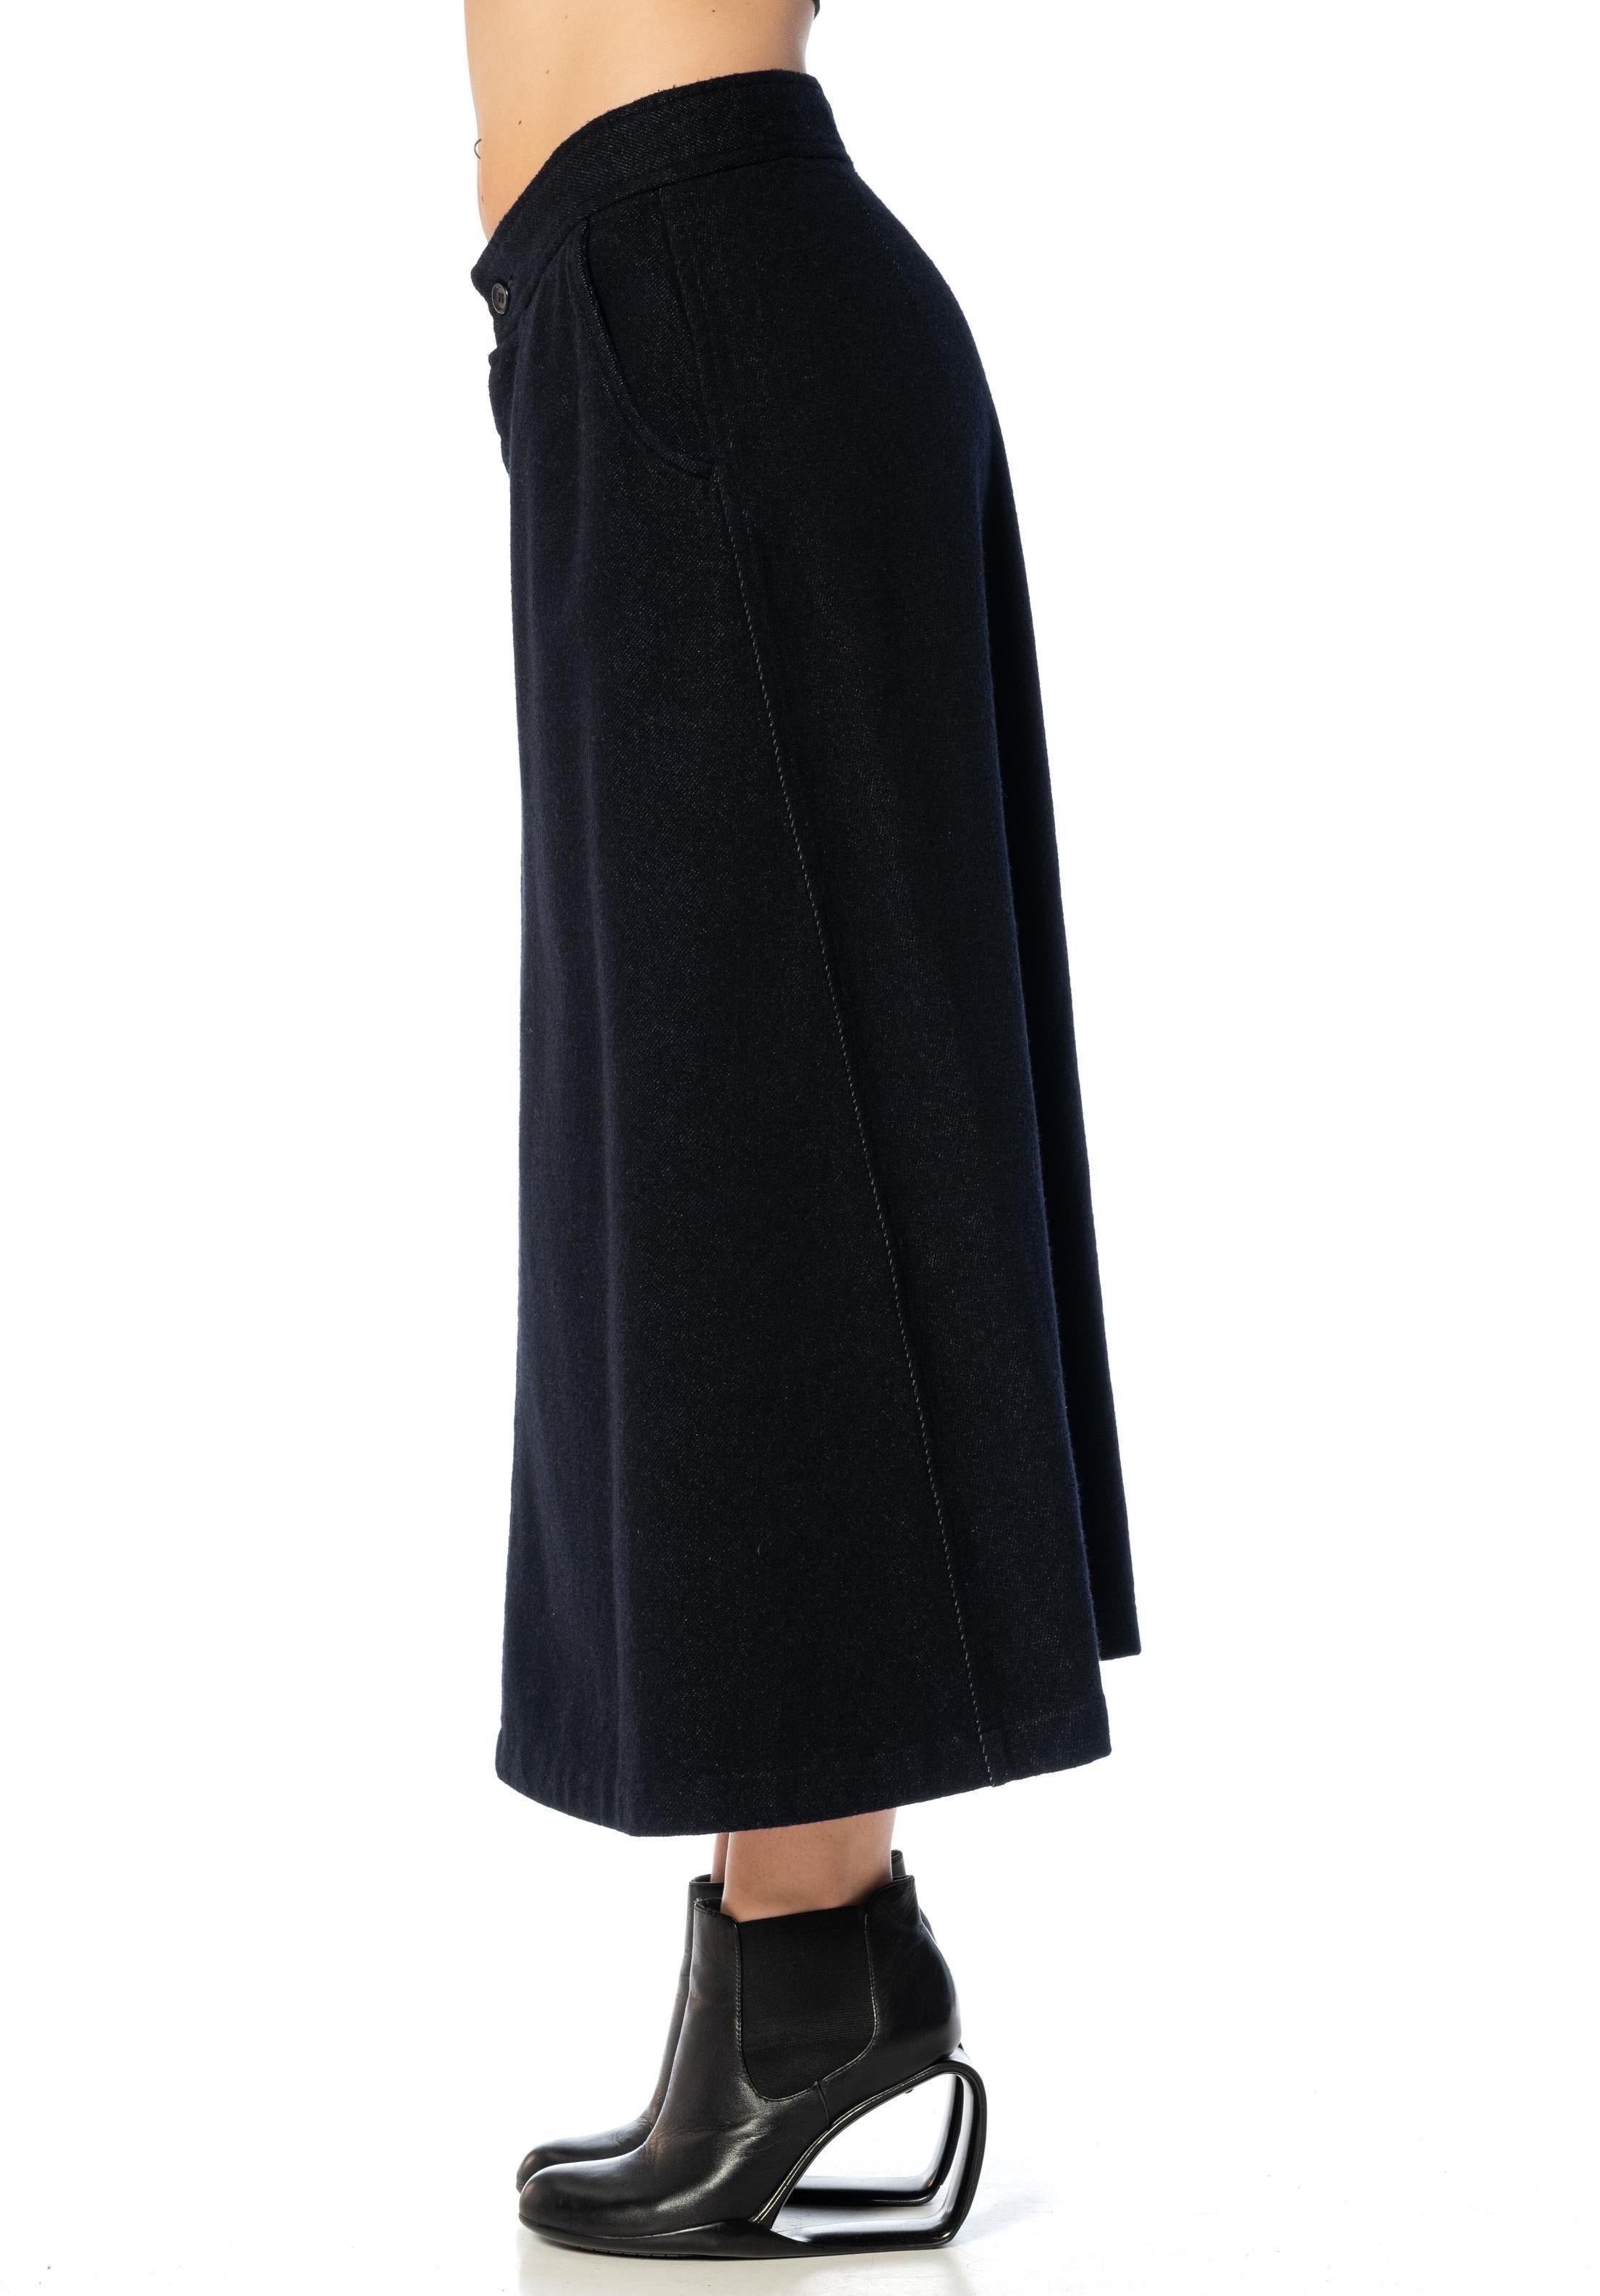 2000S COMME DES GARCONS Wool & Cotton Denim Indigo Over-Dyed Low Hip Skirt In Excellent Condition For Sale In New York, NY